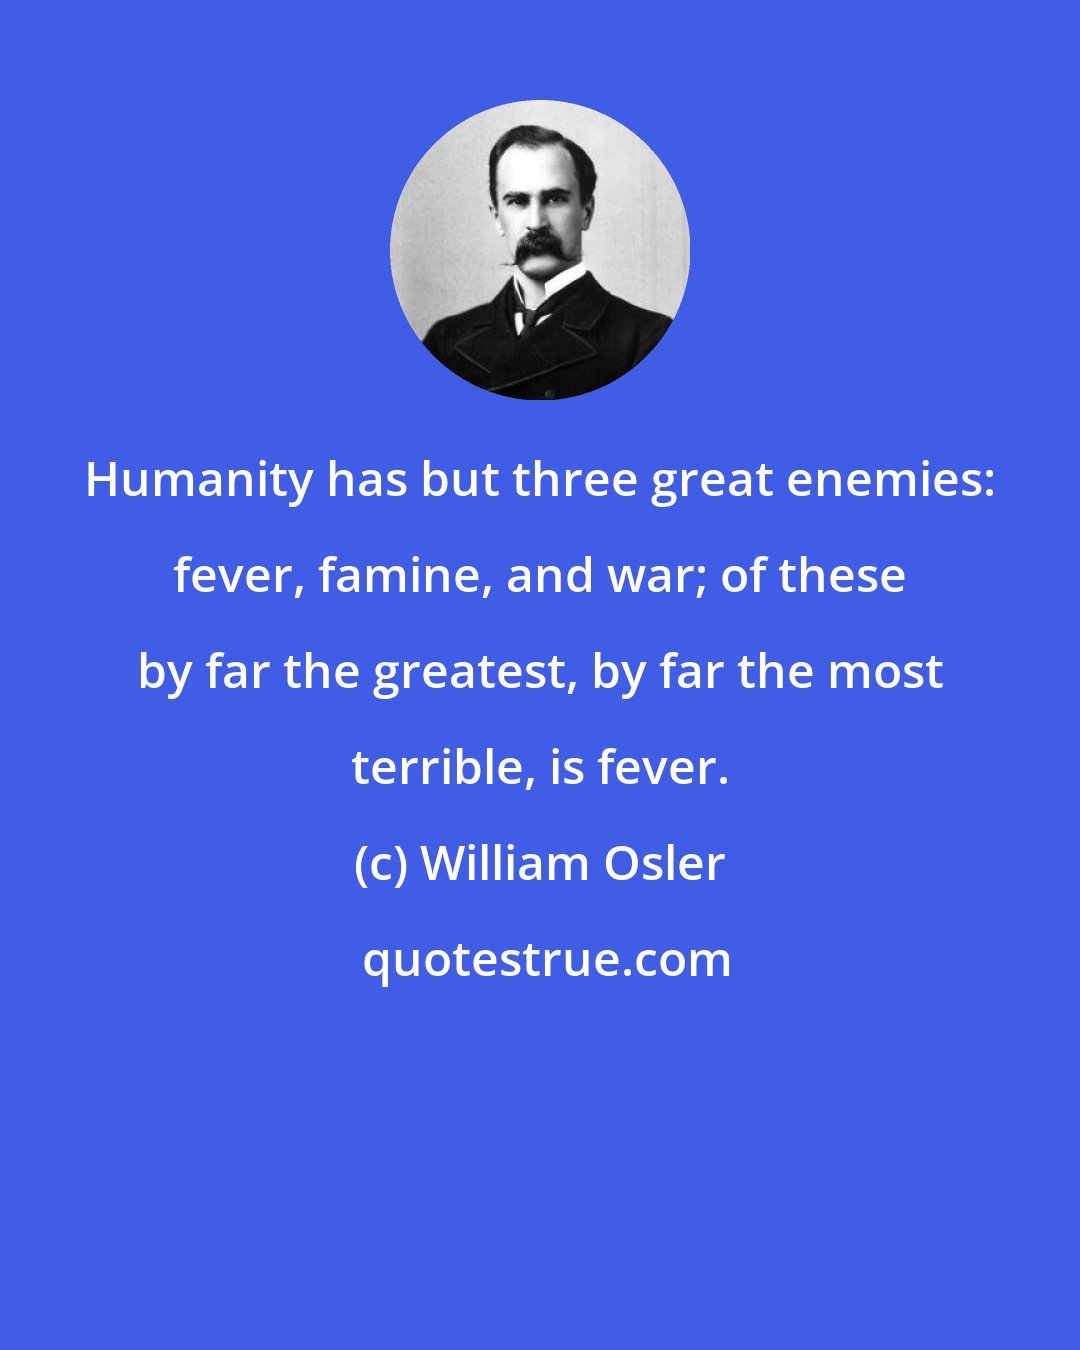 William Osler: Humanity has but three great enemies: fever, famine, and war; of these by far the greatest, by far the most terrible, is fever.